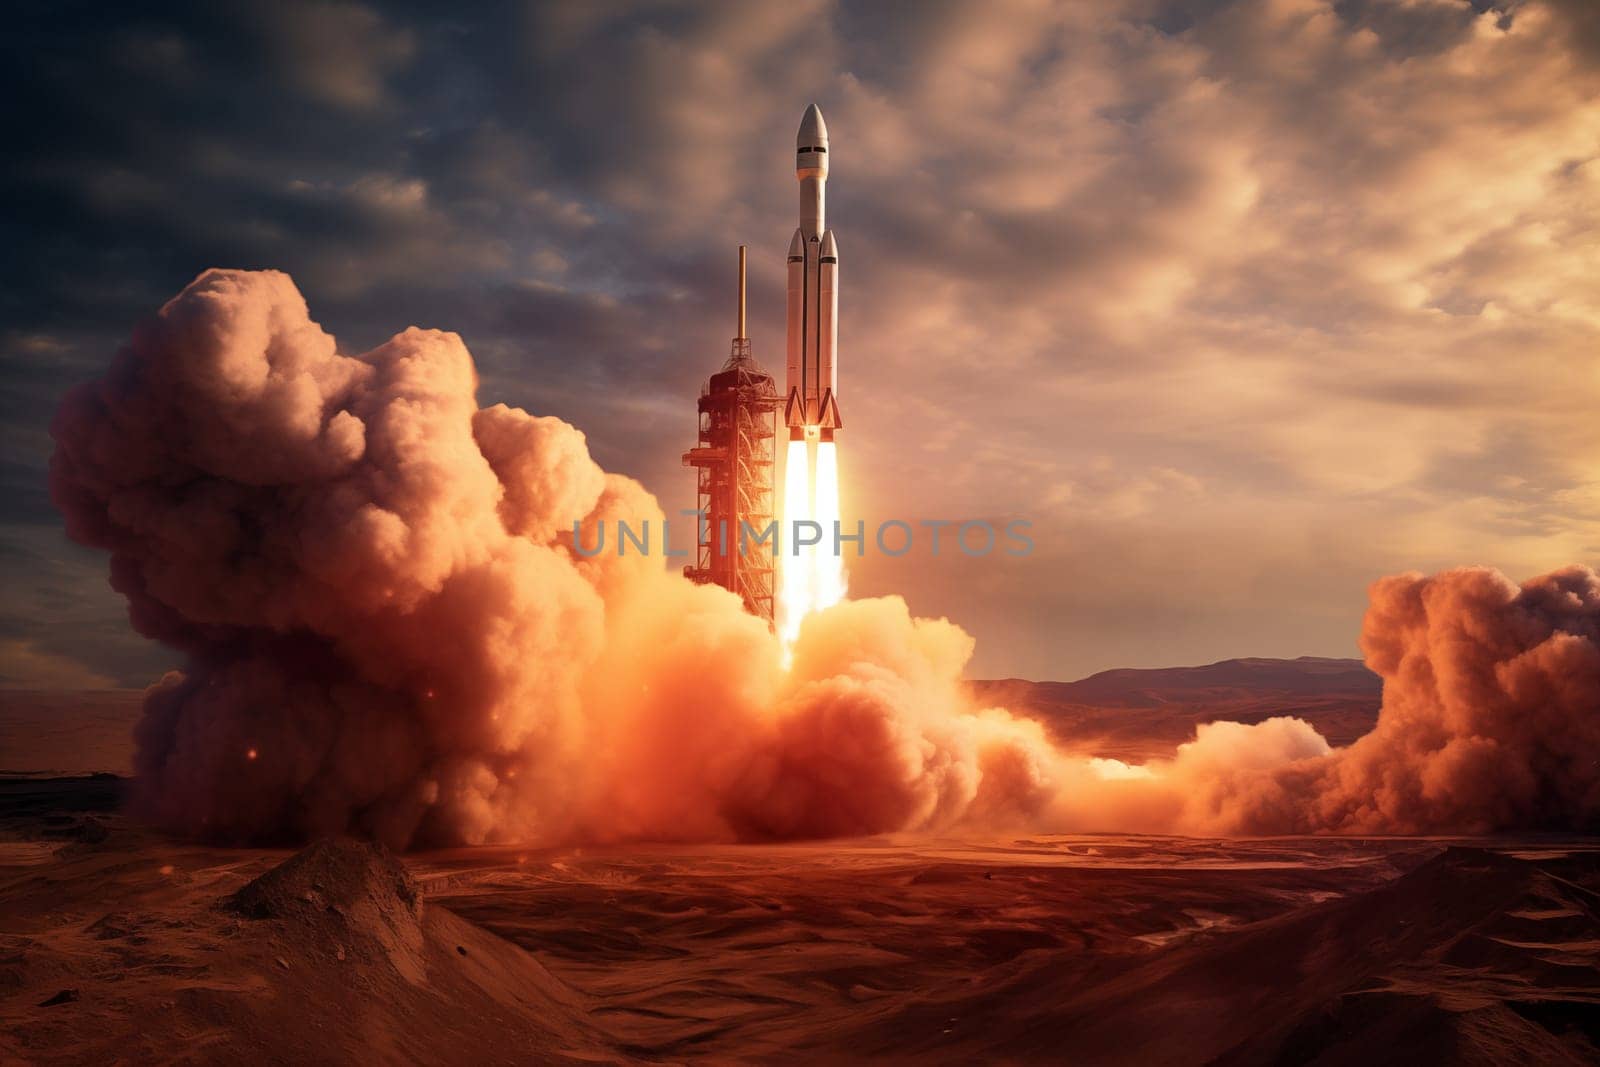 View of rocket launch at sunrise over ocean coast by dimol